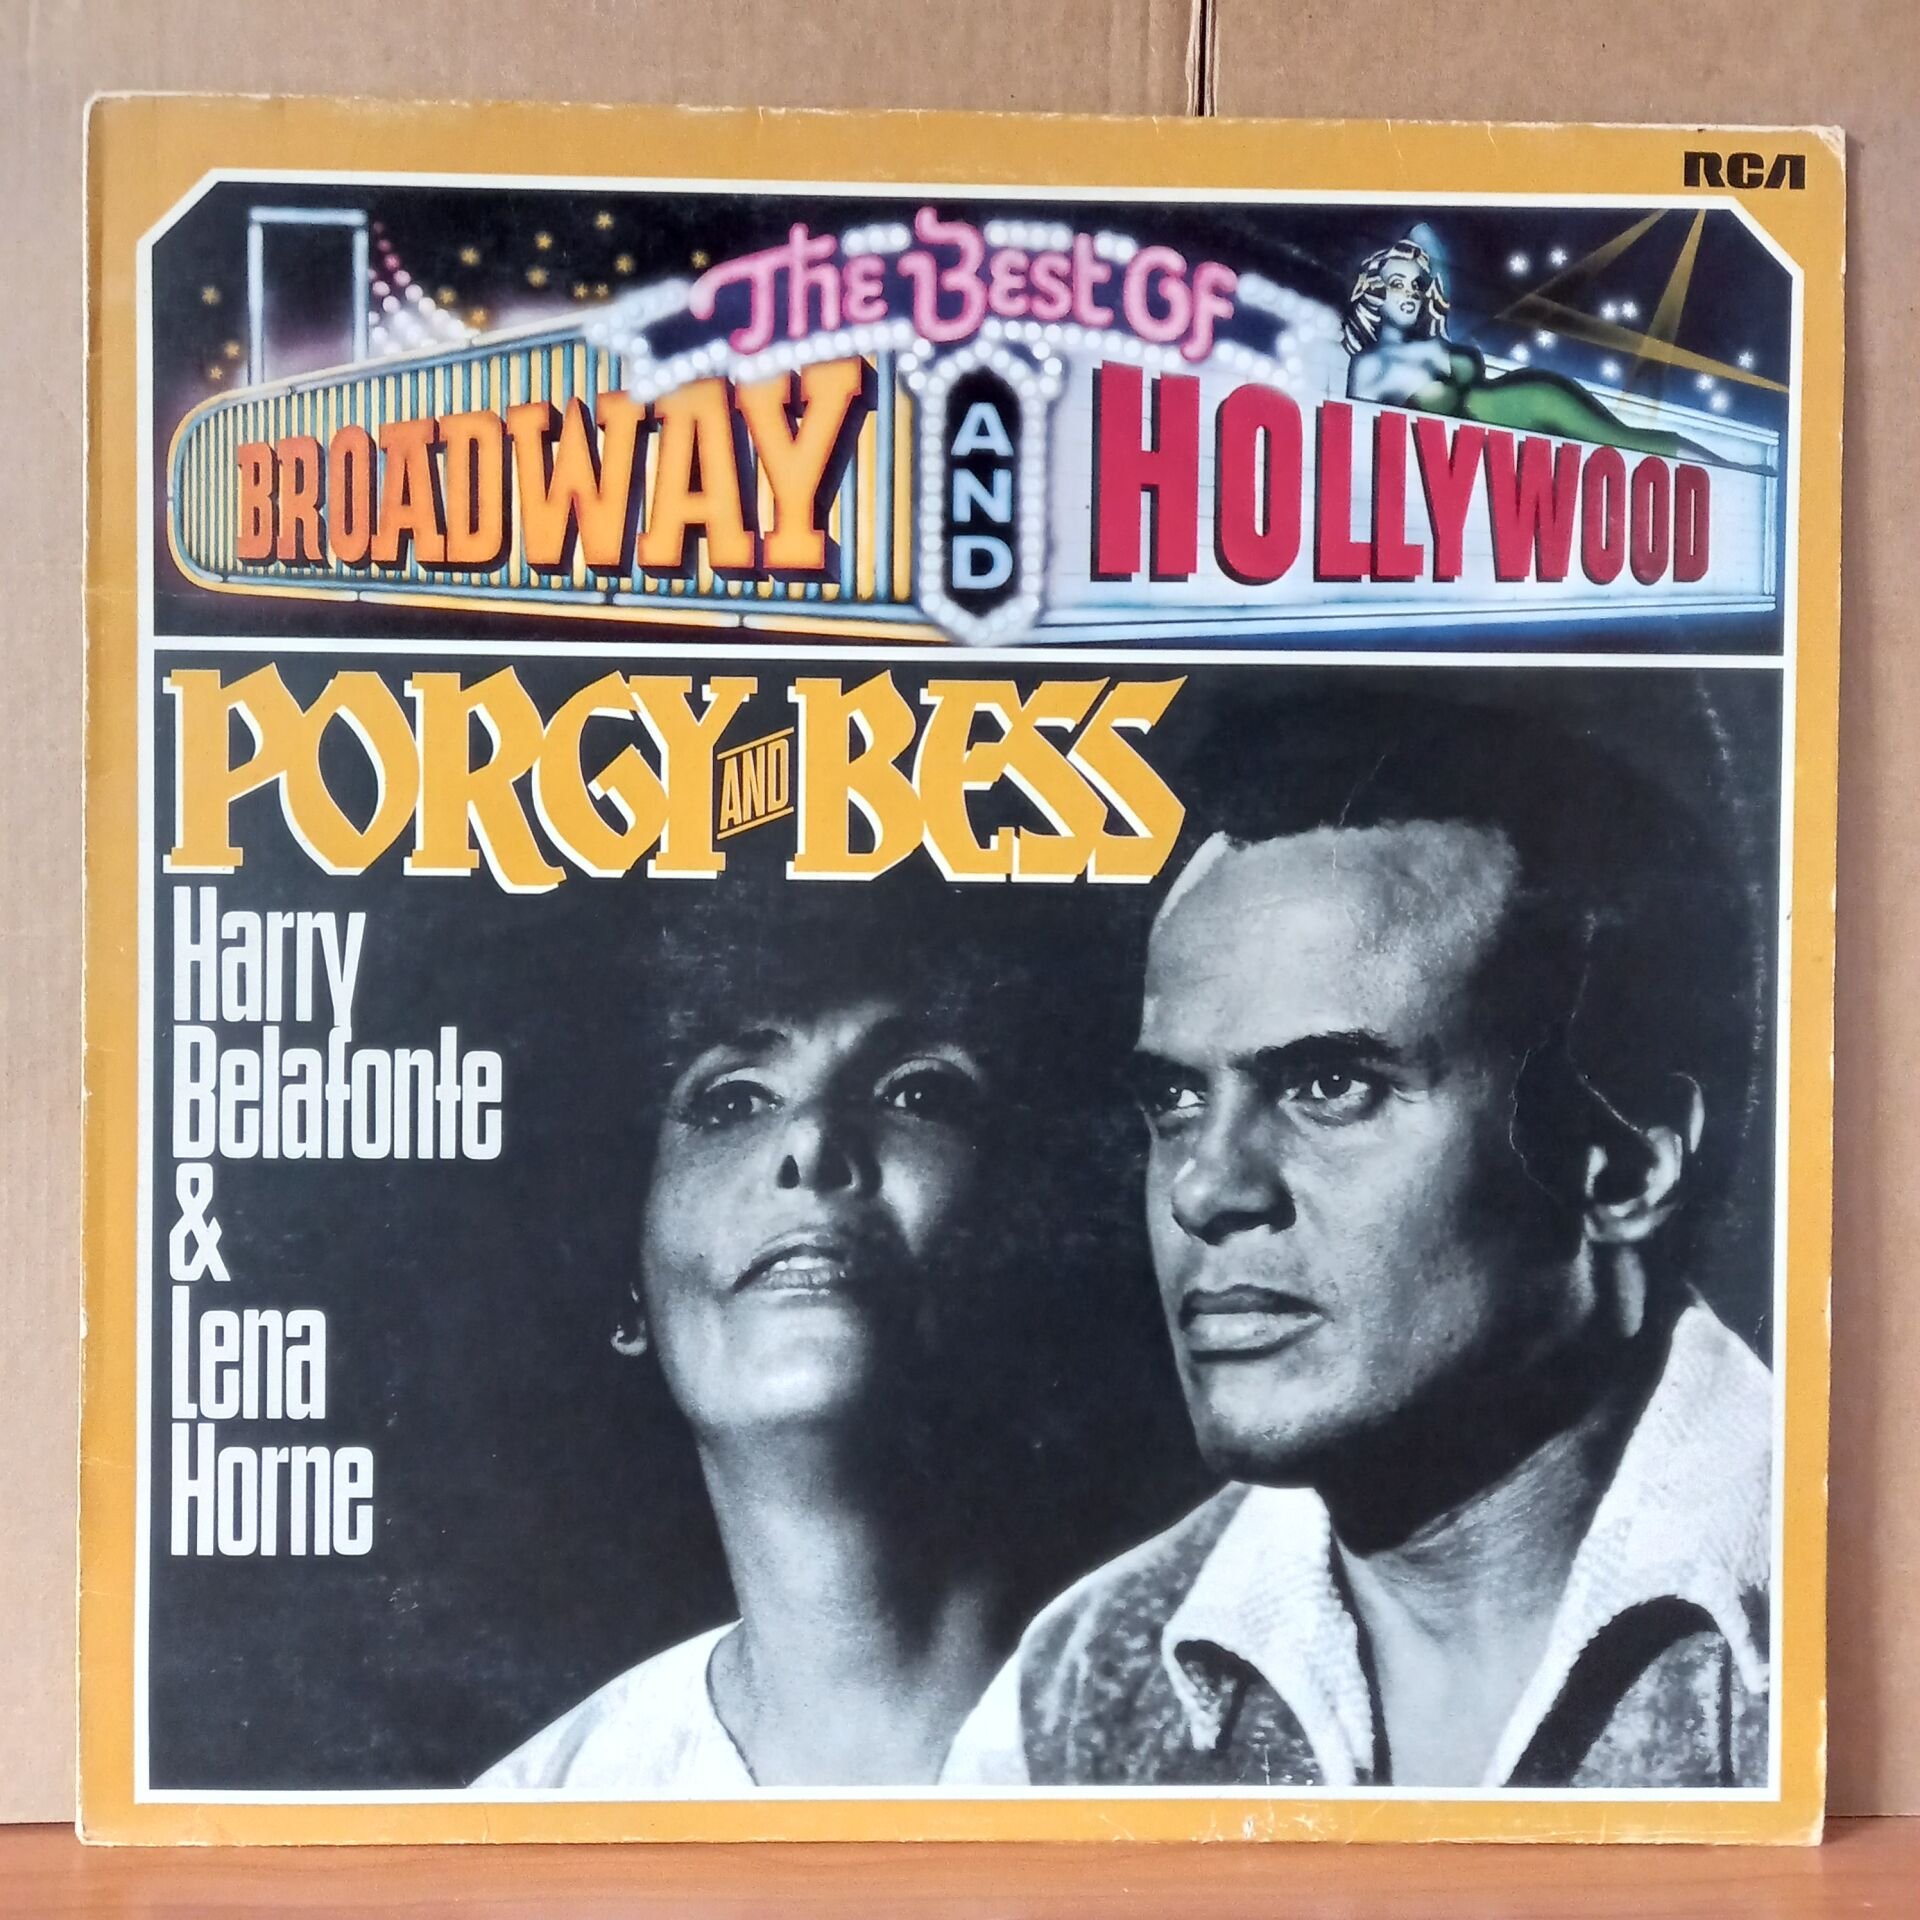 THE BEST OF BROADWAY AND HOLLYWOOD - PORGY AND BESS / HARRY BELAFONTE & LENA HORNE (1976) - LP 2.EL PLAK